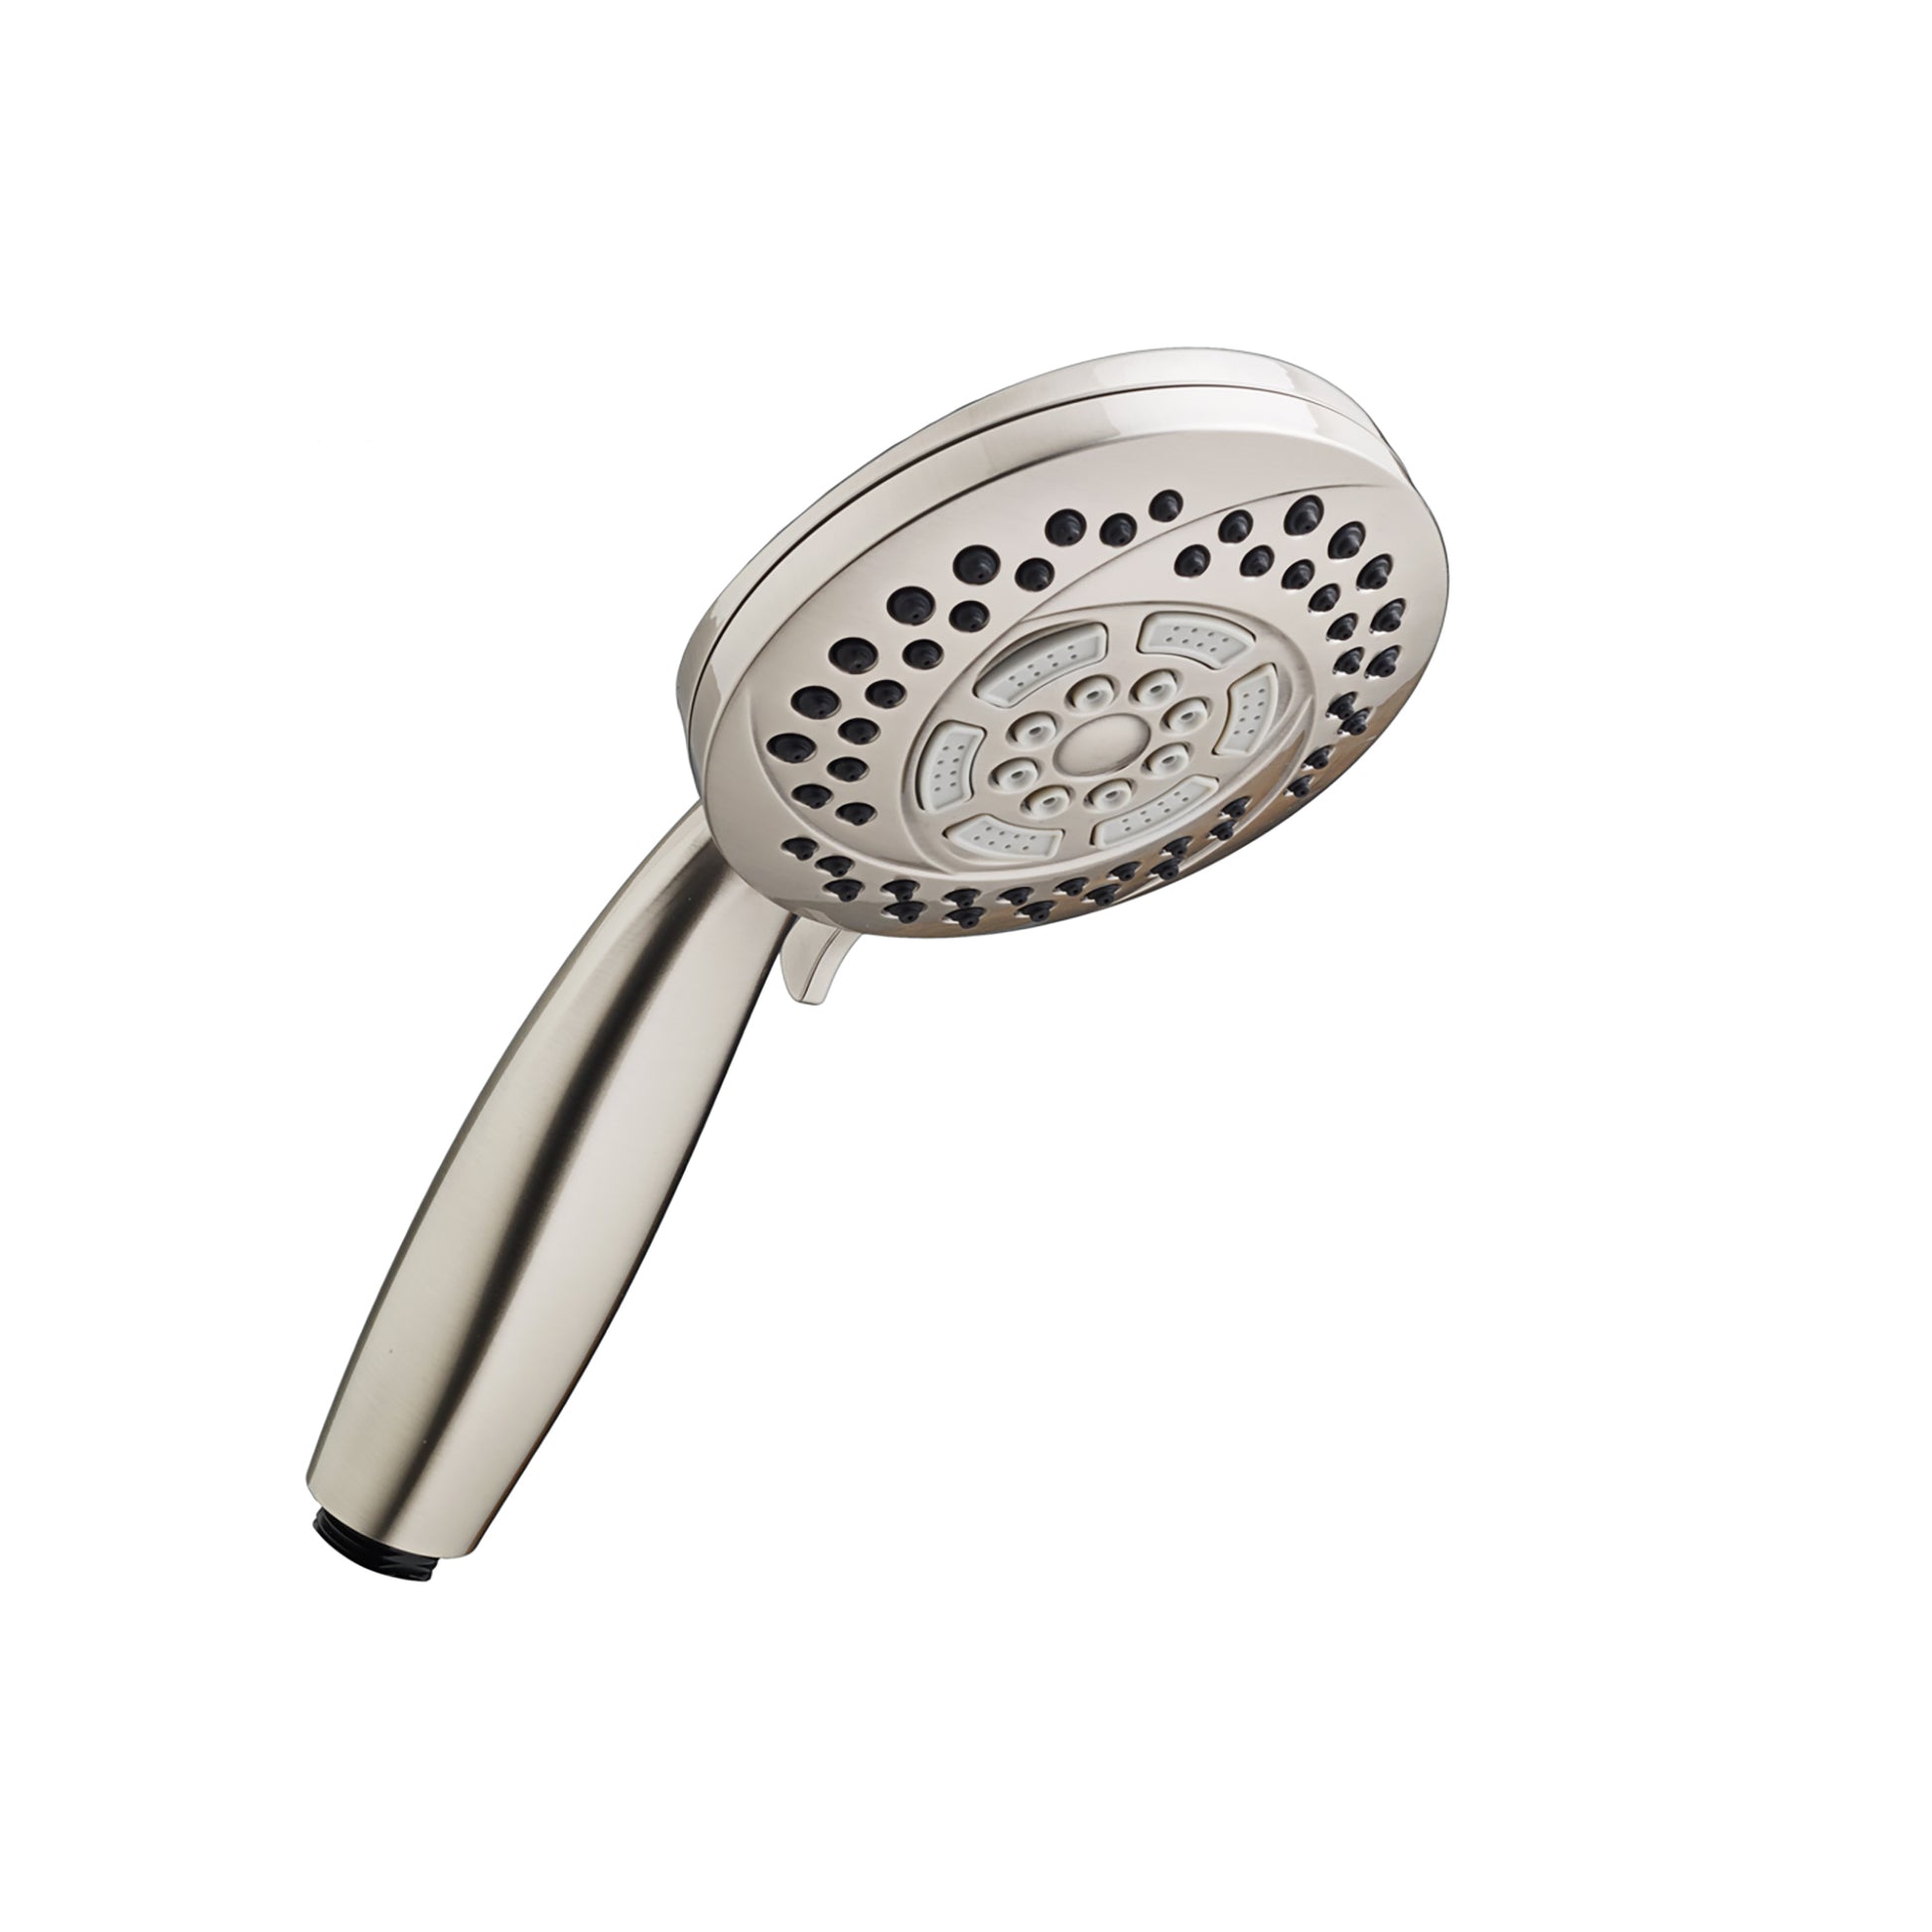 AMERICAN-STANDARD 1660207.295, HydroFocus 2.0 gpm/7.6 L/min 4-1/2-Inch 5-Function Hand Shower in Brushed Nickel